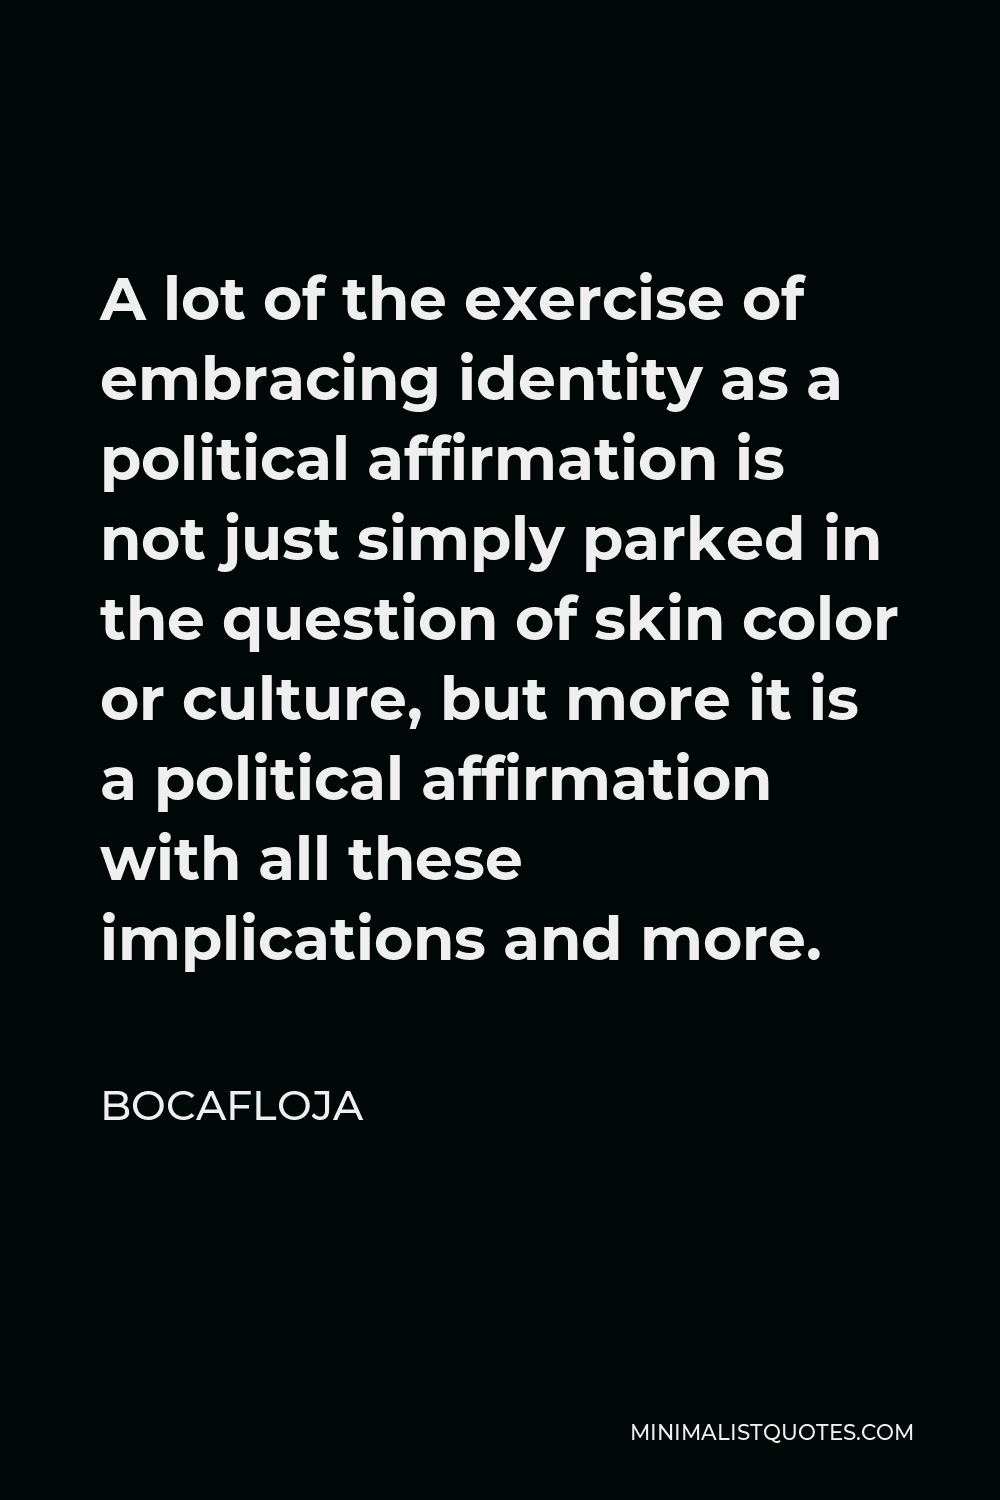 Bocafloja Quote - A lot of the exercise of embracing identity as a political affirmation is not just simply parked in the question of skin color or culture, but more it is a political affirmation with all these implications and more.